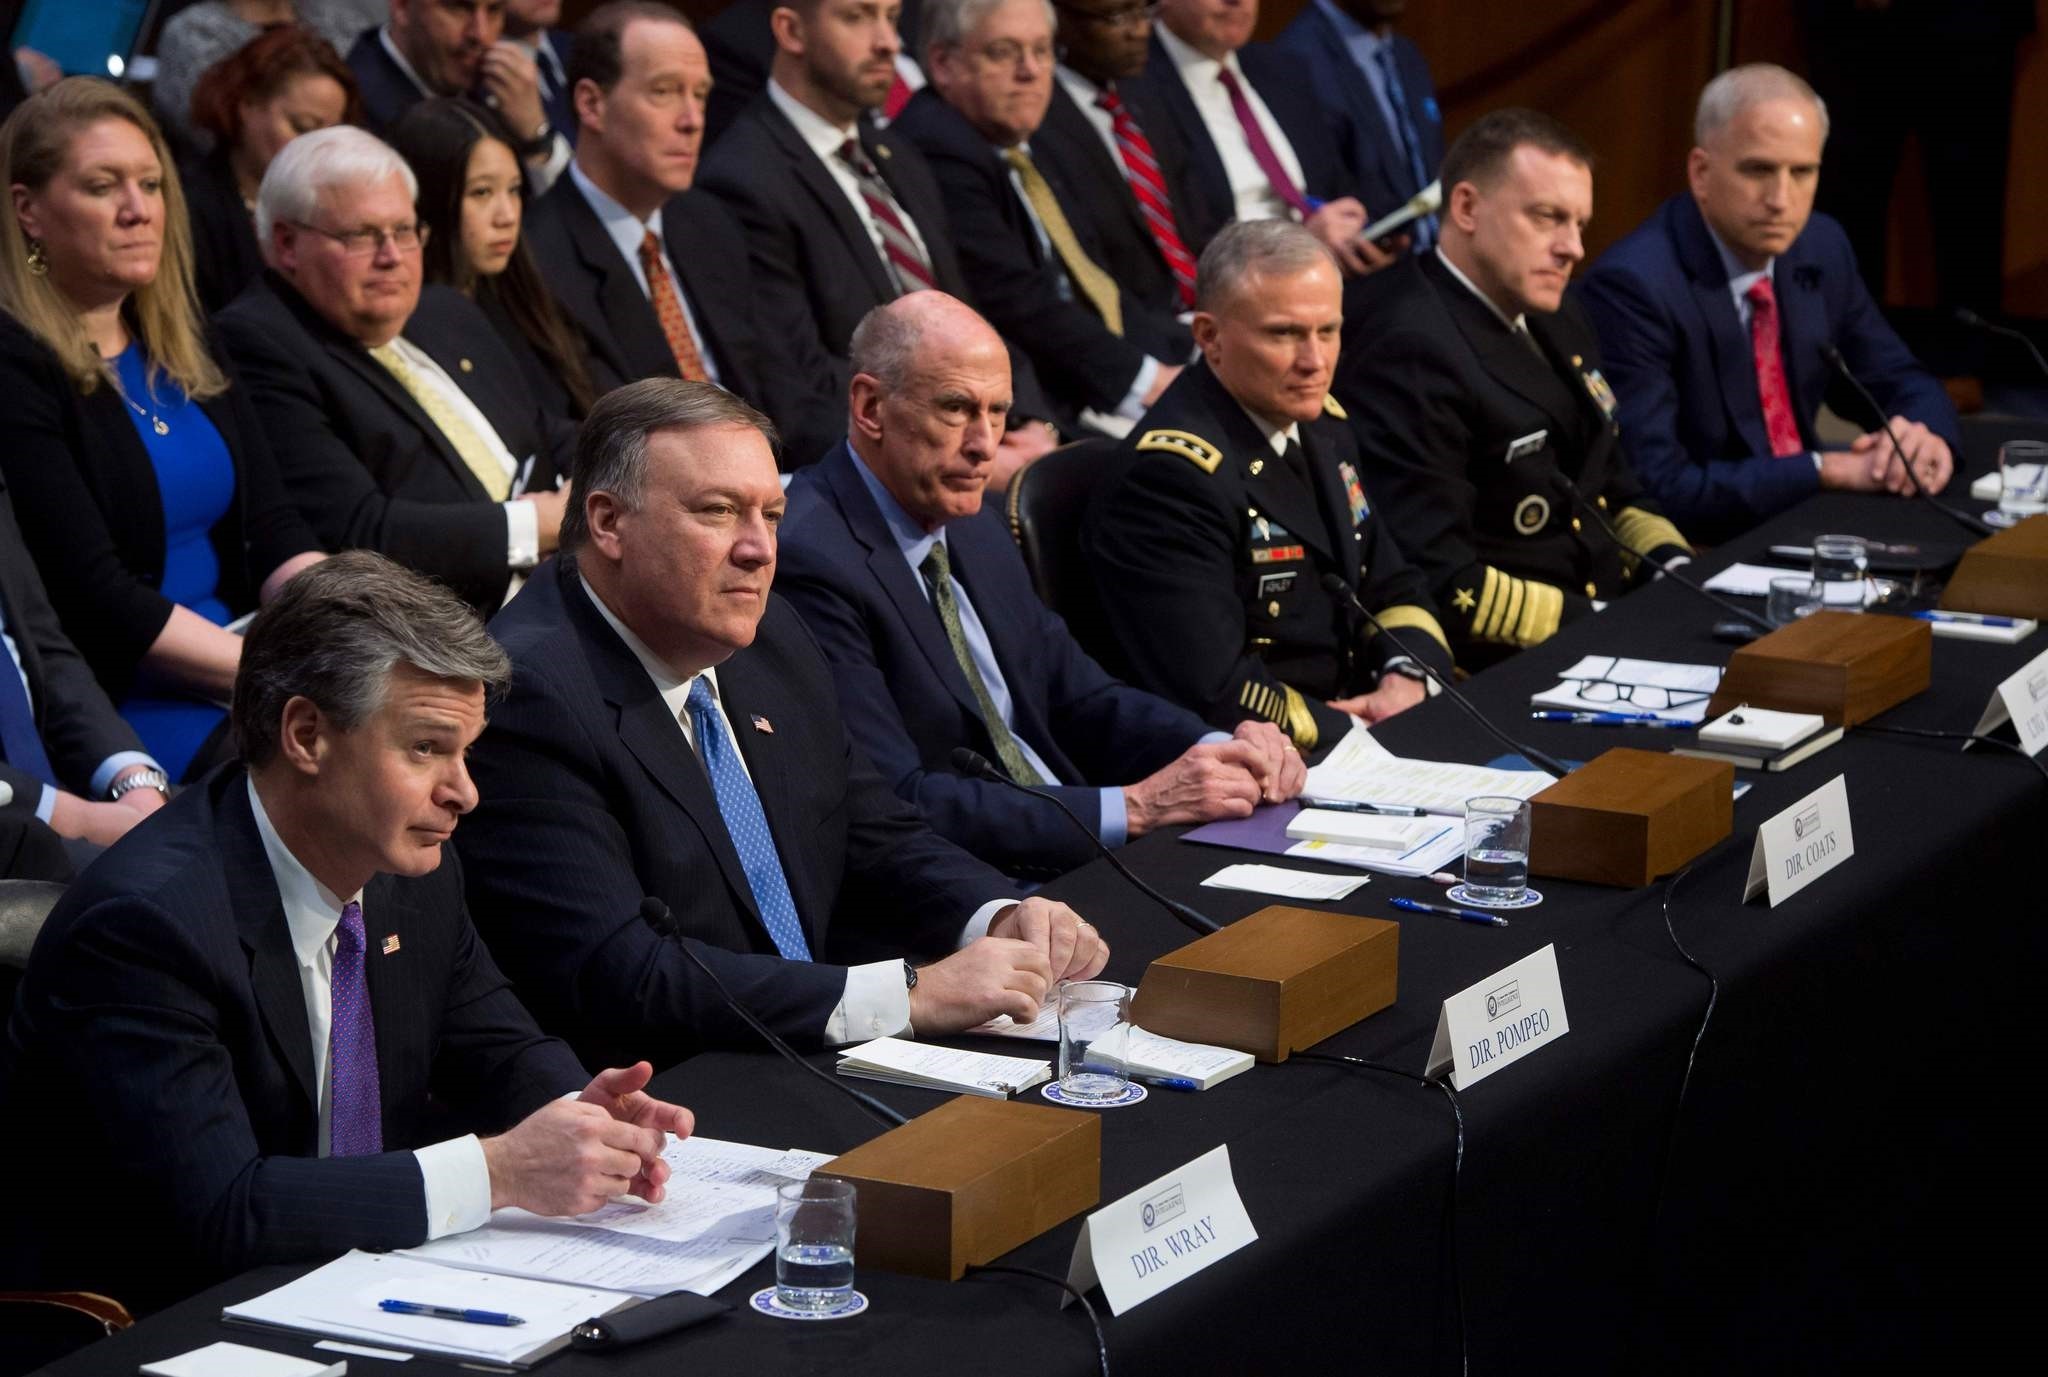 Top U.S. intelligence officials testify on worldwide threats during a Senate Intelligence Committee hearing on Capitol Hill in Washington, DC, February 13, 2018. (AFP Photo)